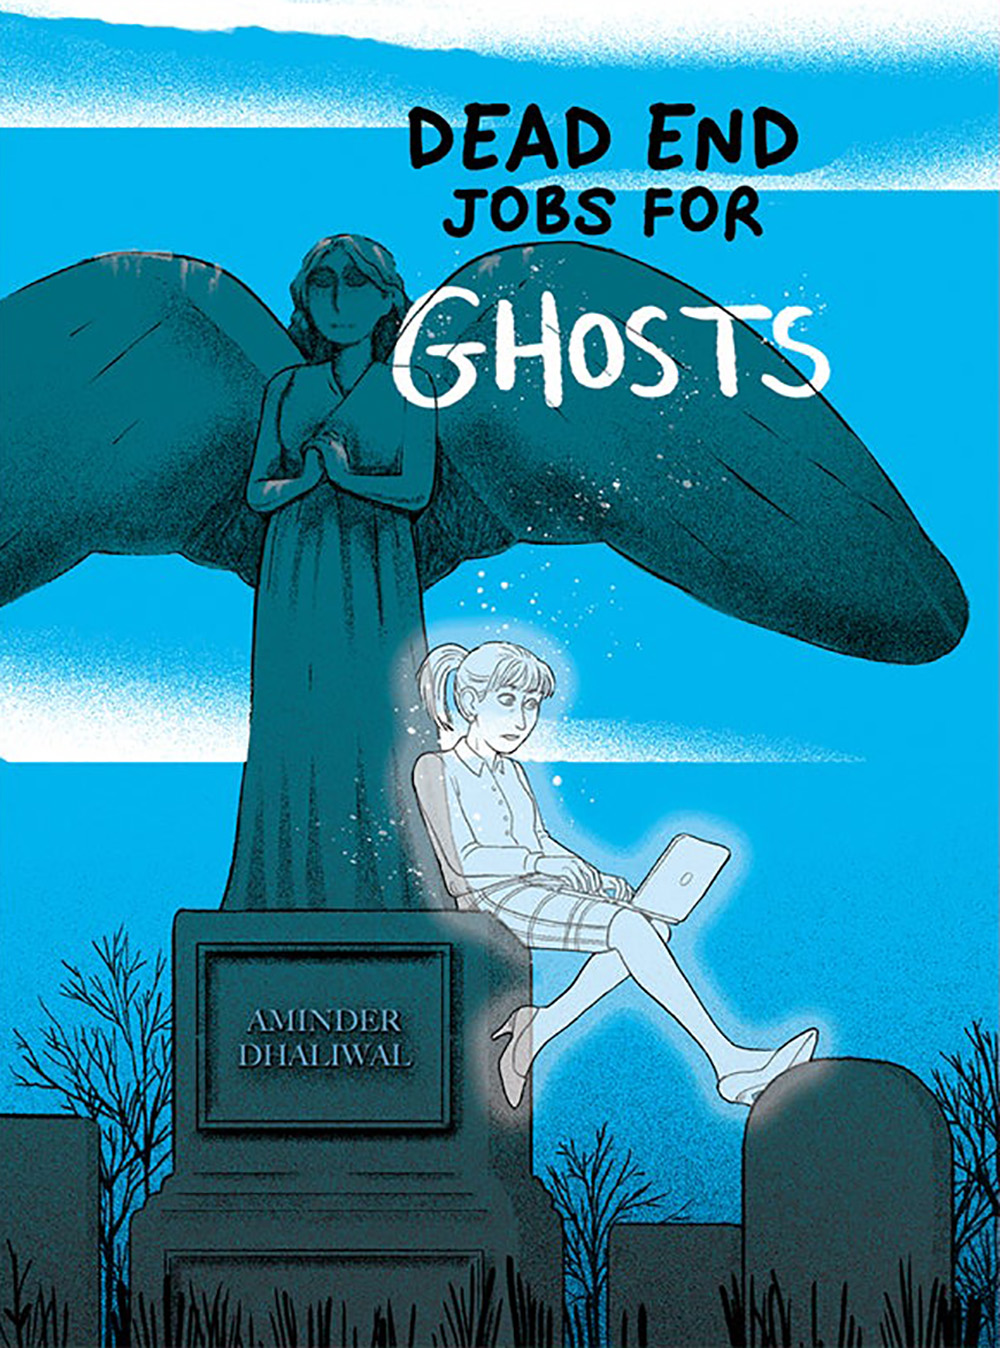 Dead End Jobs for Ghosts, Aminder Dhaliwal